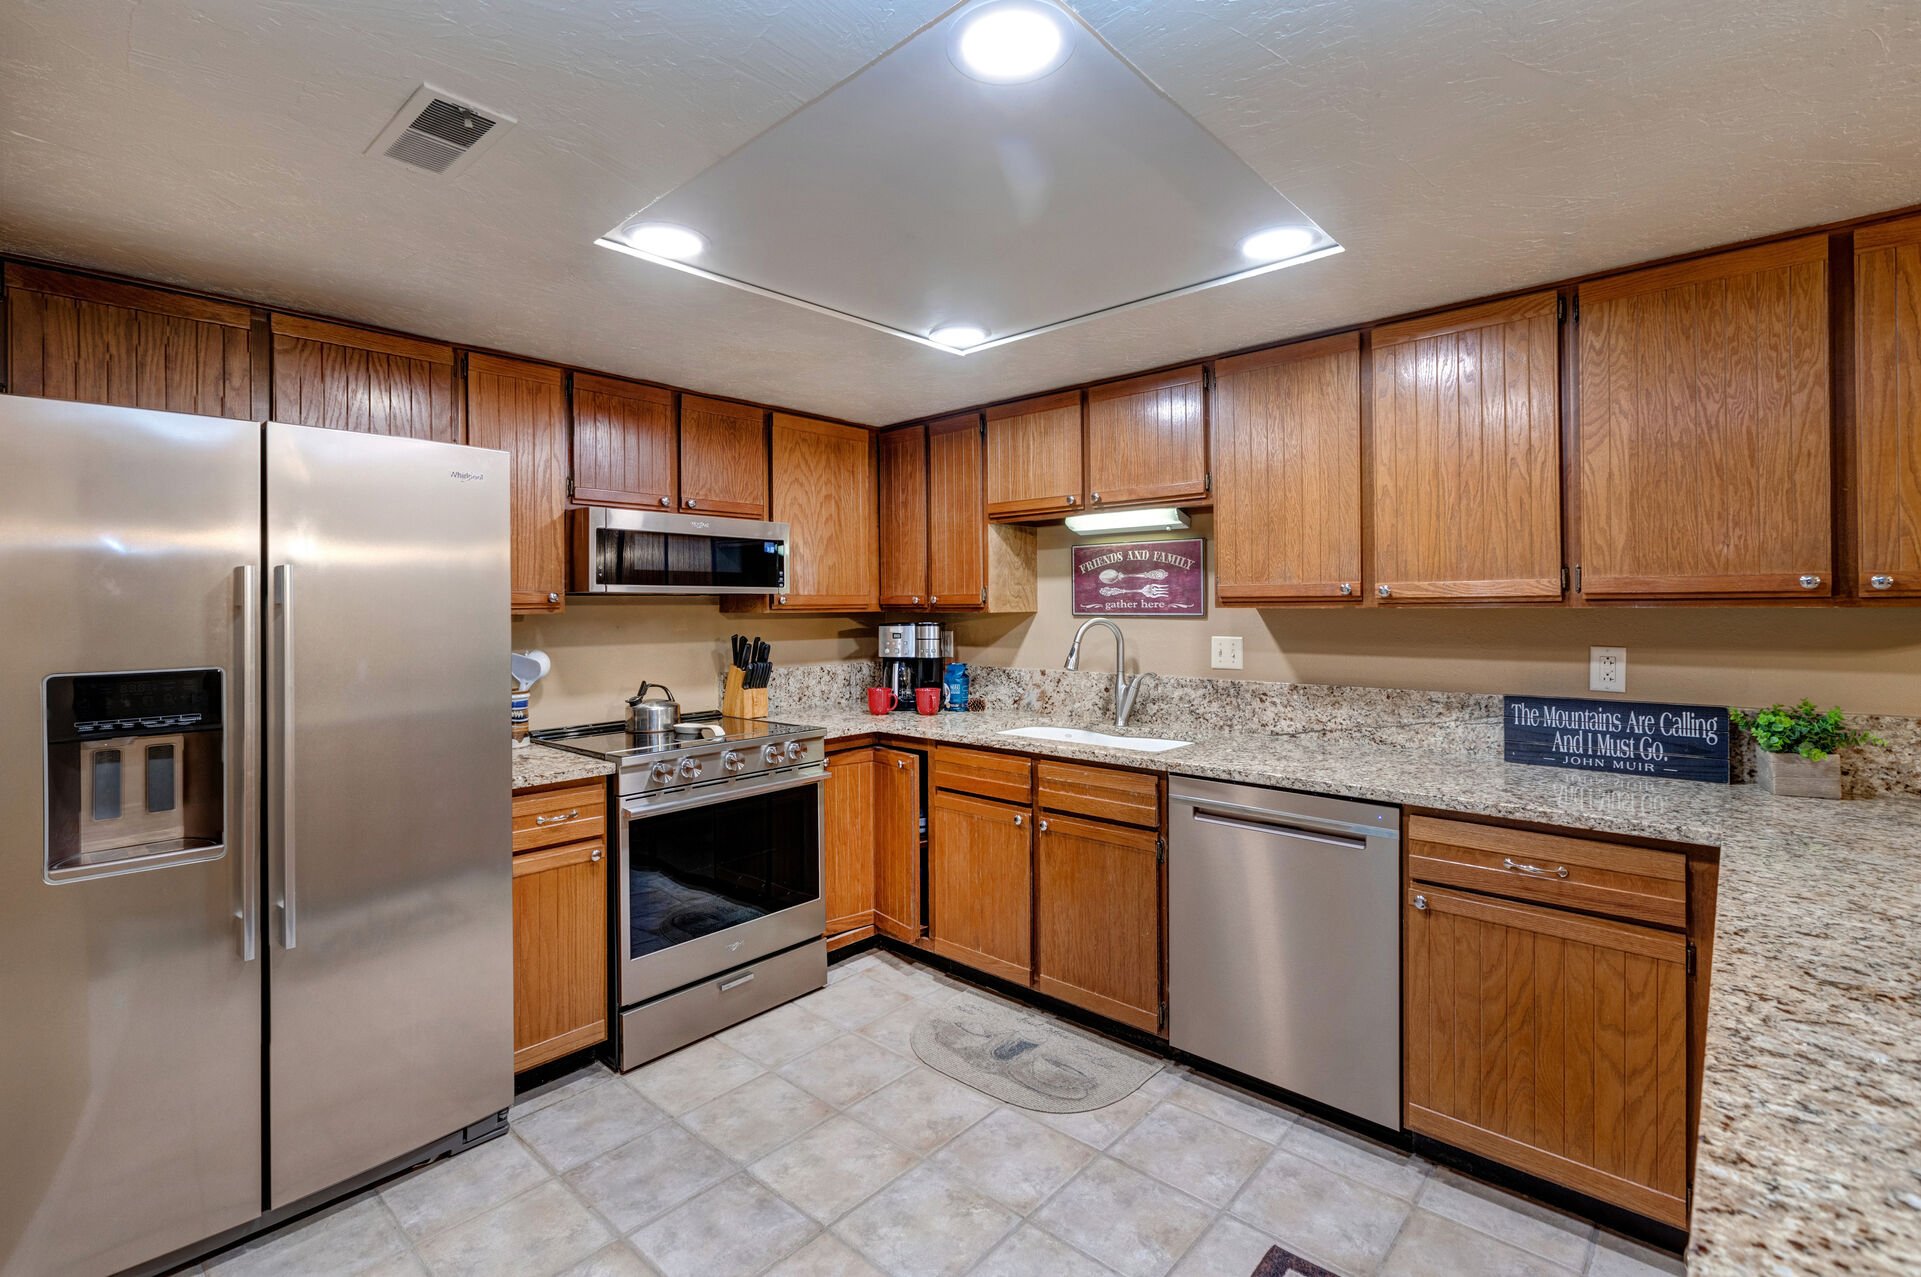 Fully Equipped Kitchen with beautiful stone countertops, stainless steel appliances, ice maker, and ample counter space for meal prep